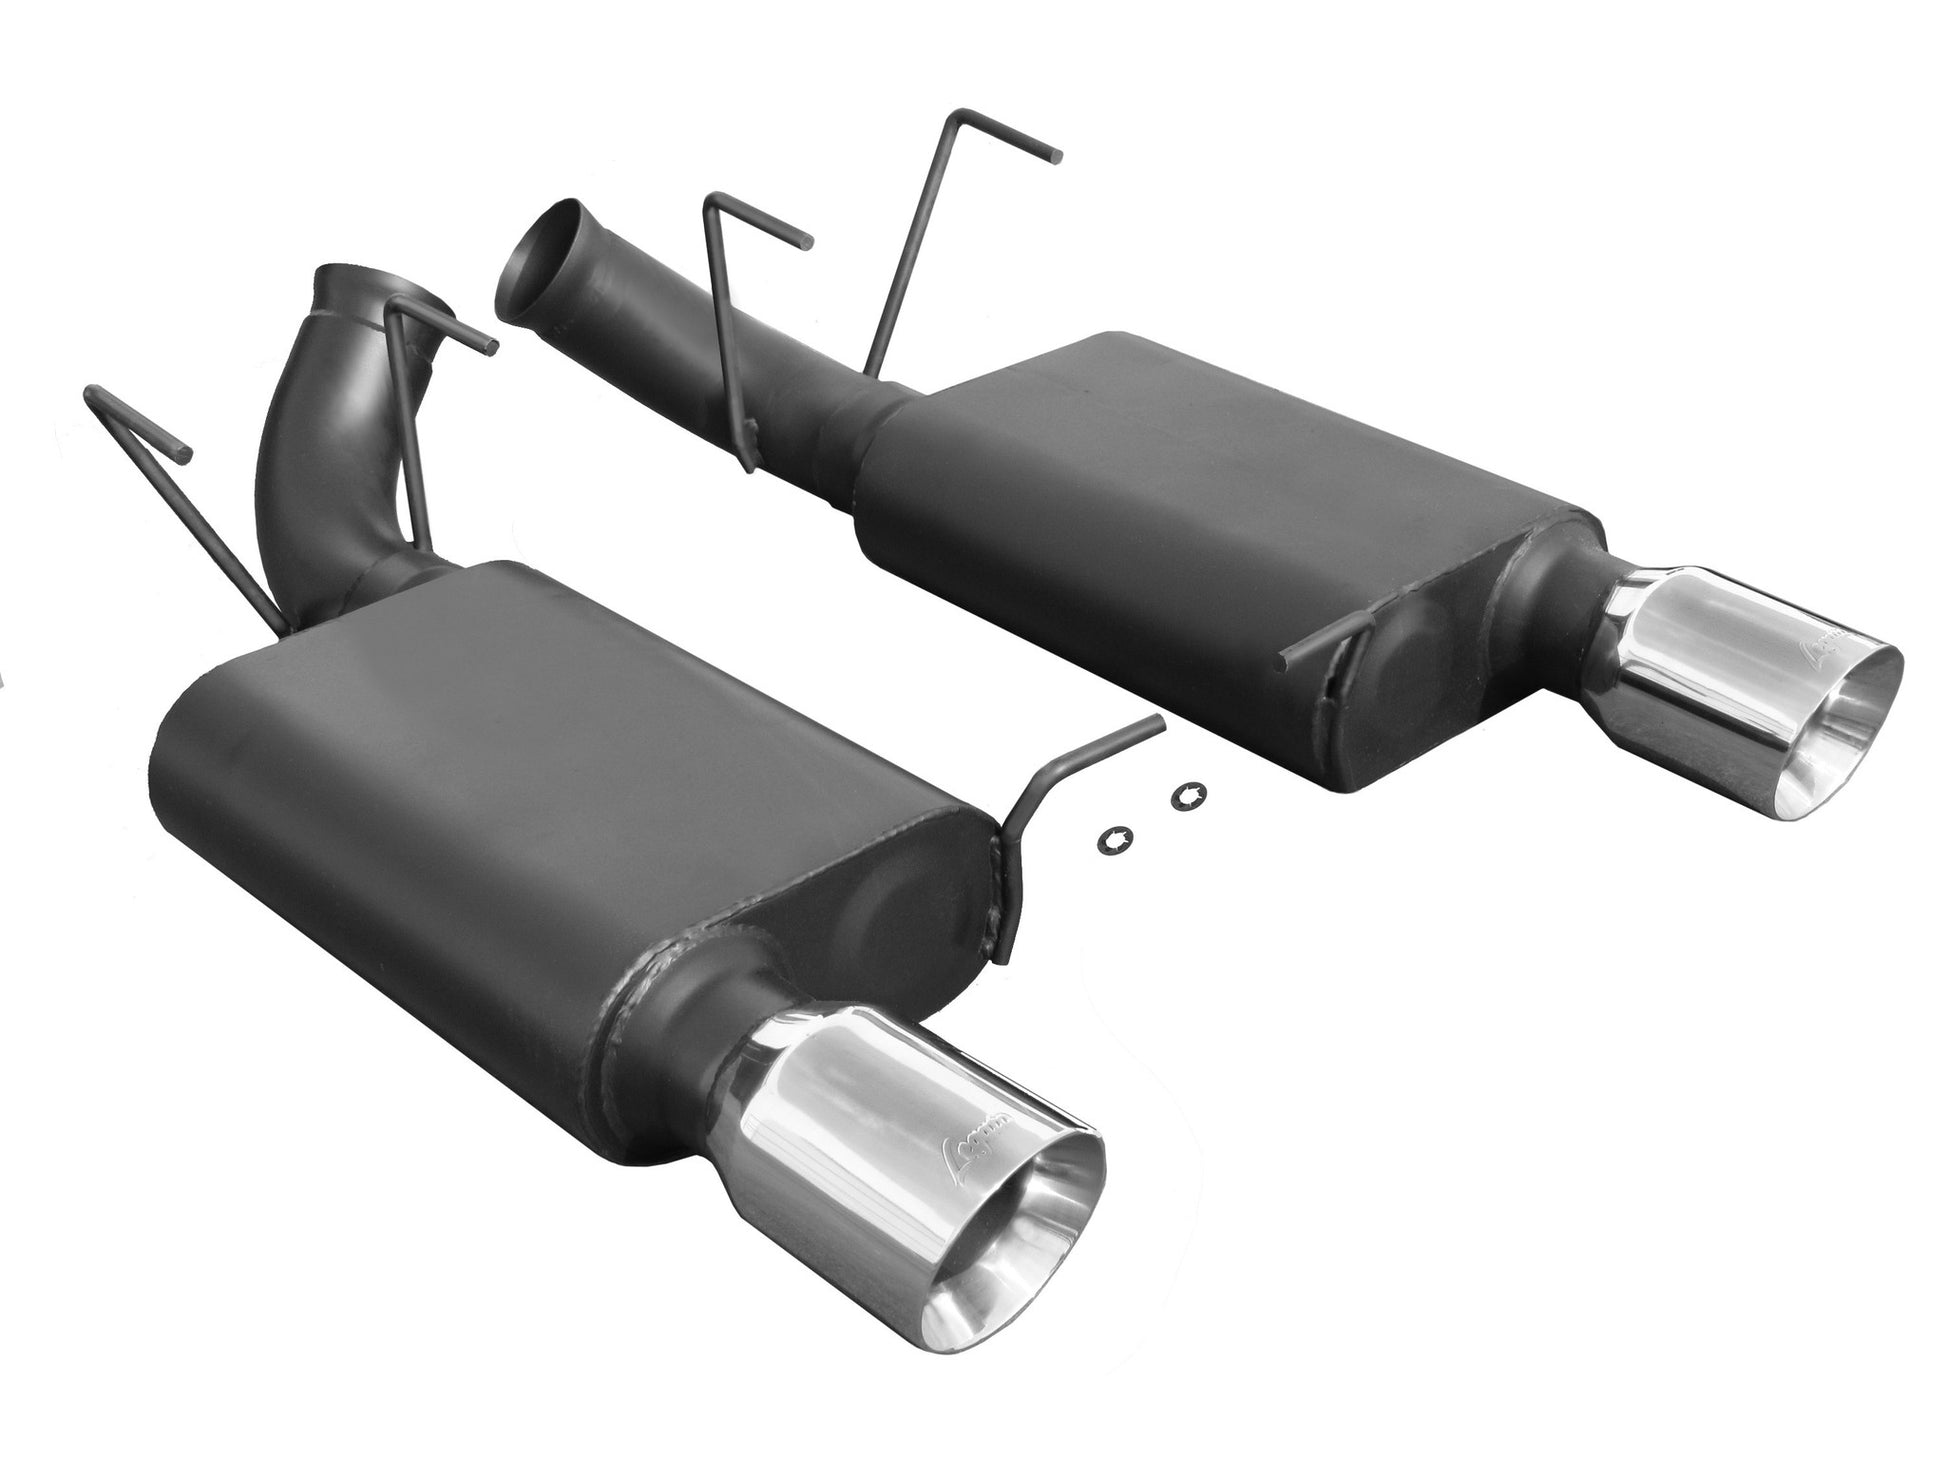 Ford Mustang GT V8 Axle Back Exhaust 2011-'12 - Buy Online